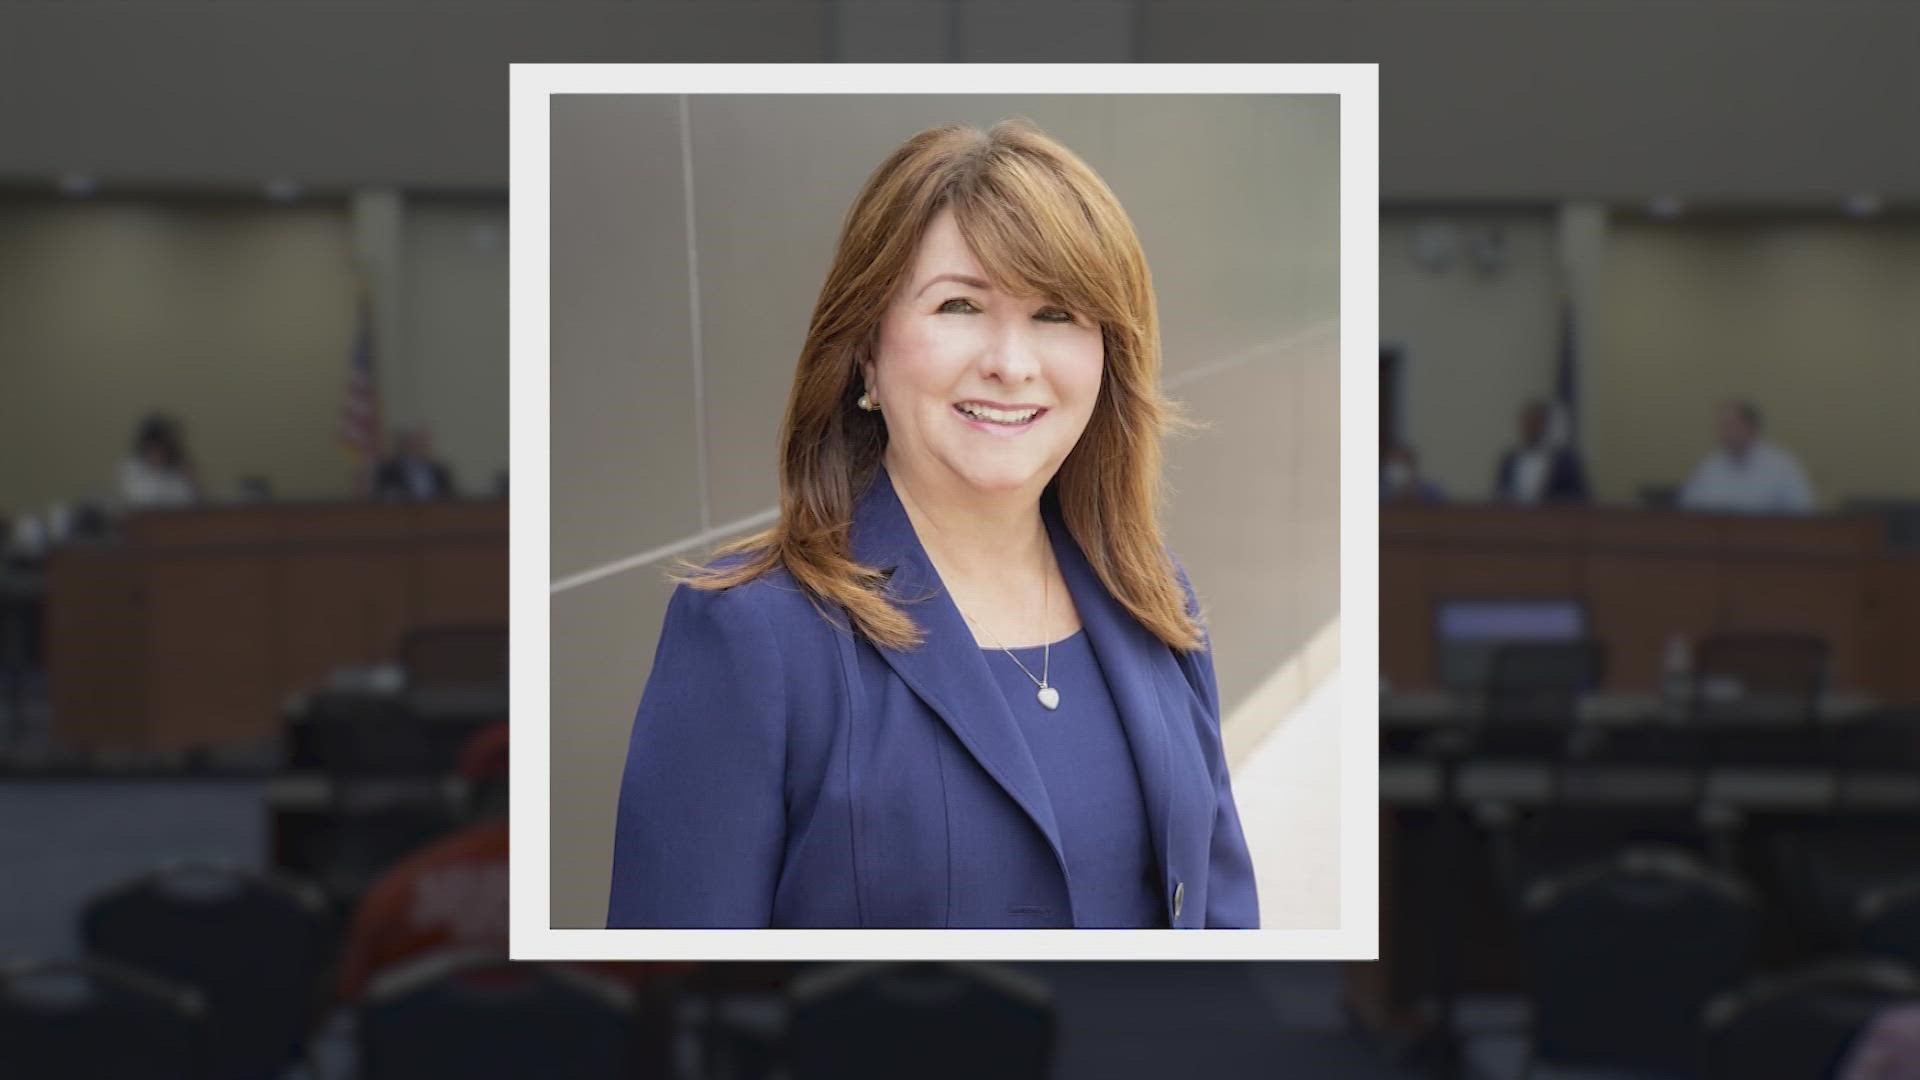 The Dallas ISD board of trustees unanimously approved Dr. Stephanie Elizalde as the lone finalist to be the district’s next superintendent.